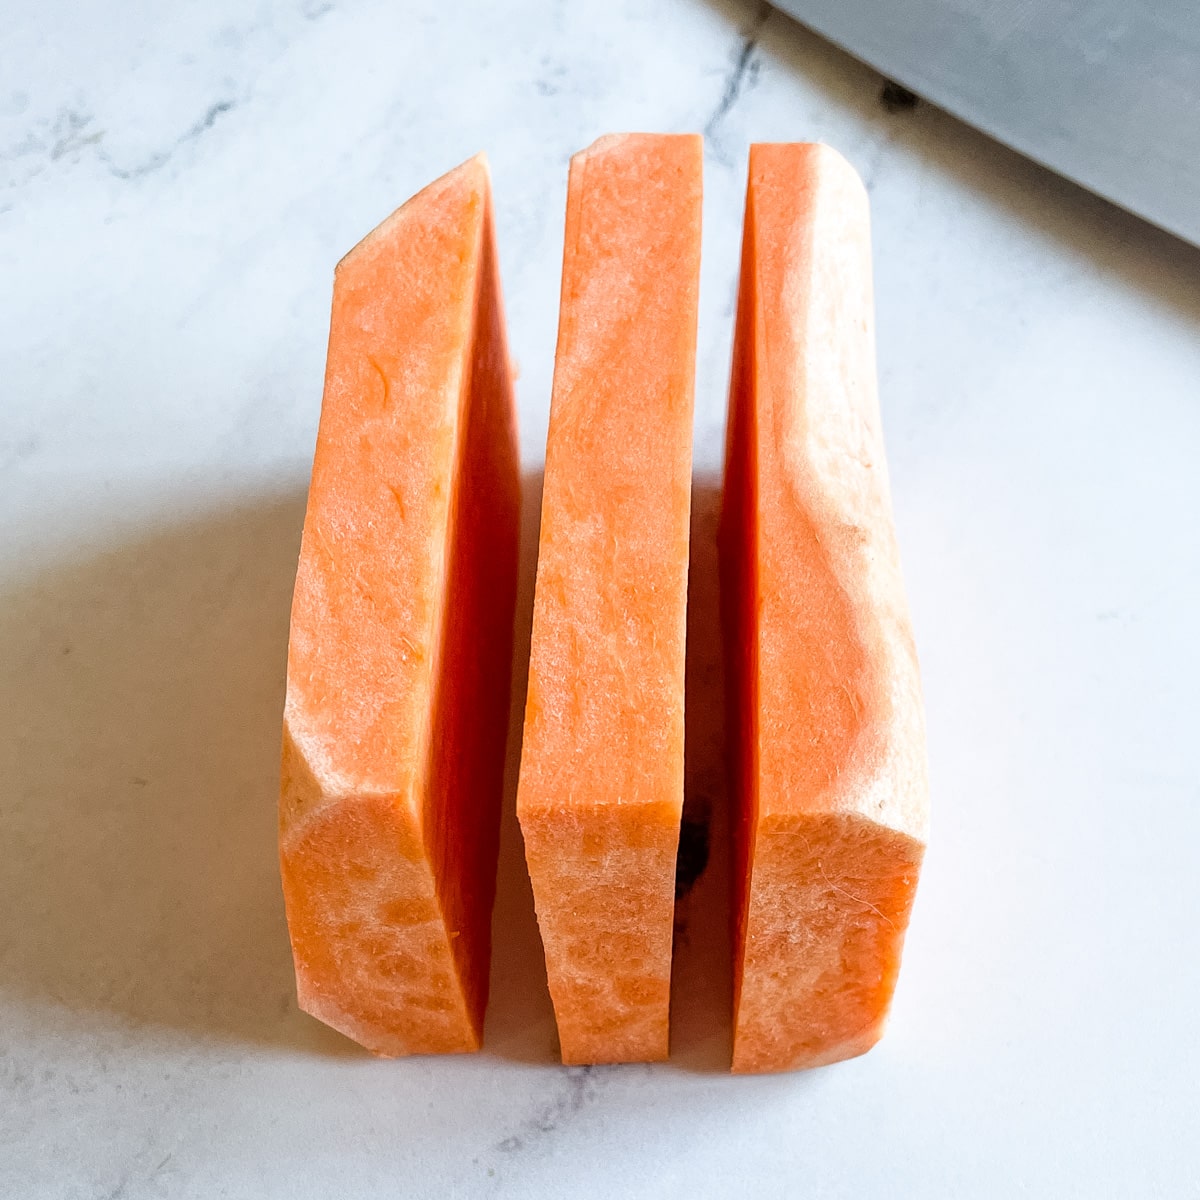 A peeled sweet potato cut horizontally into 3 equal pieces sits on a white marble counter top next to the blade of a kitchen knife